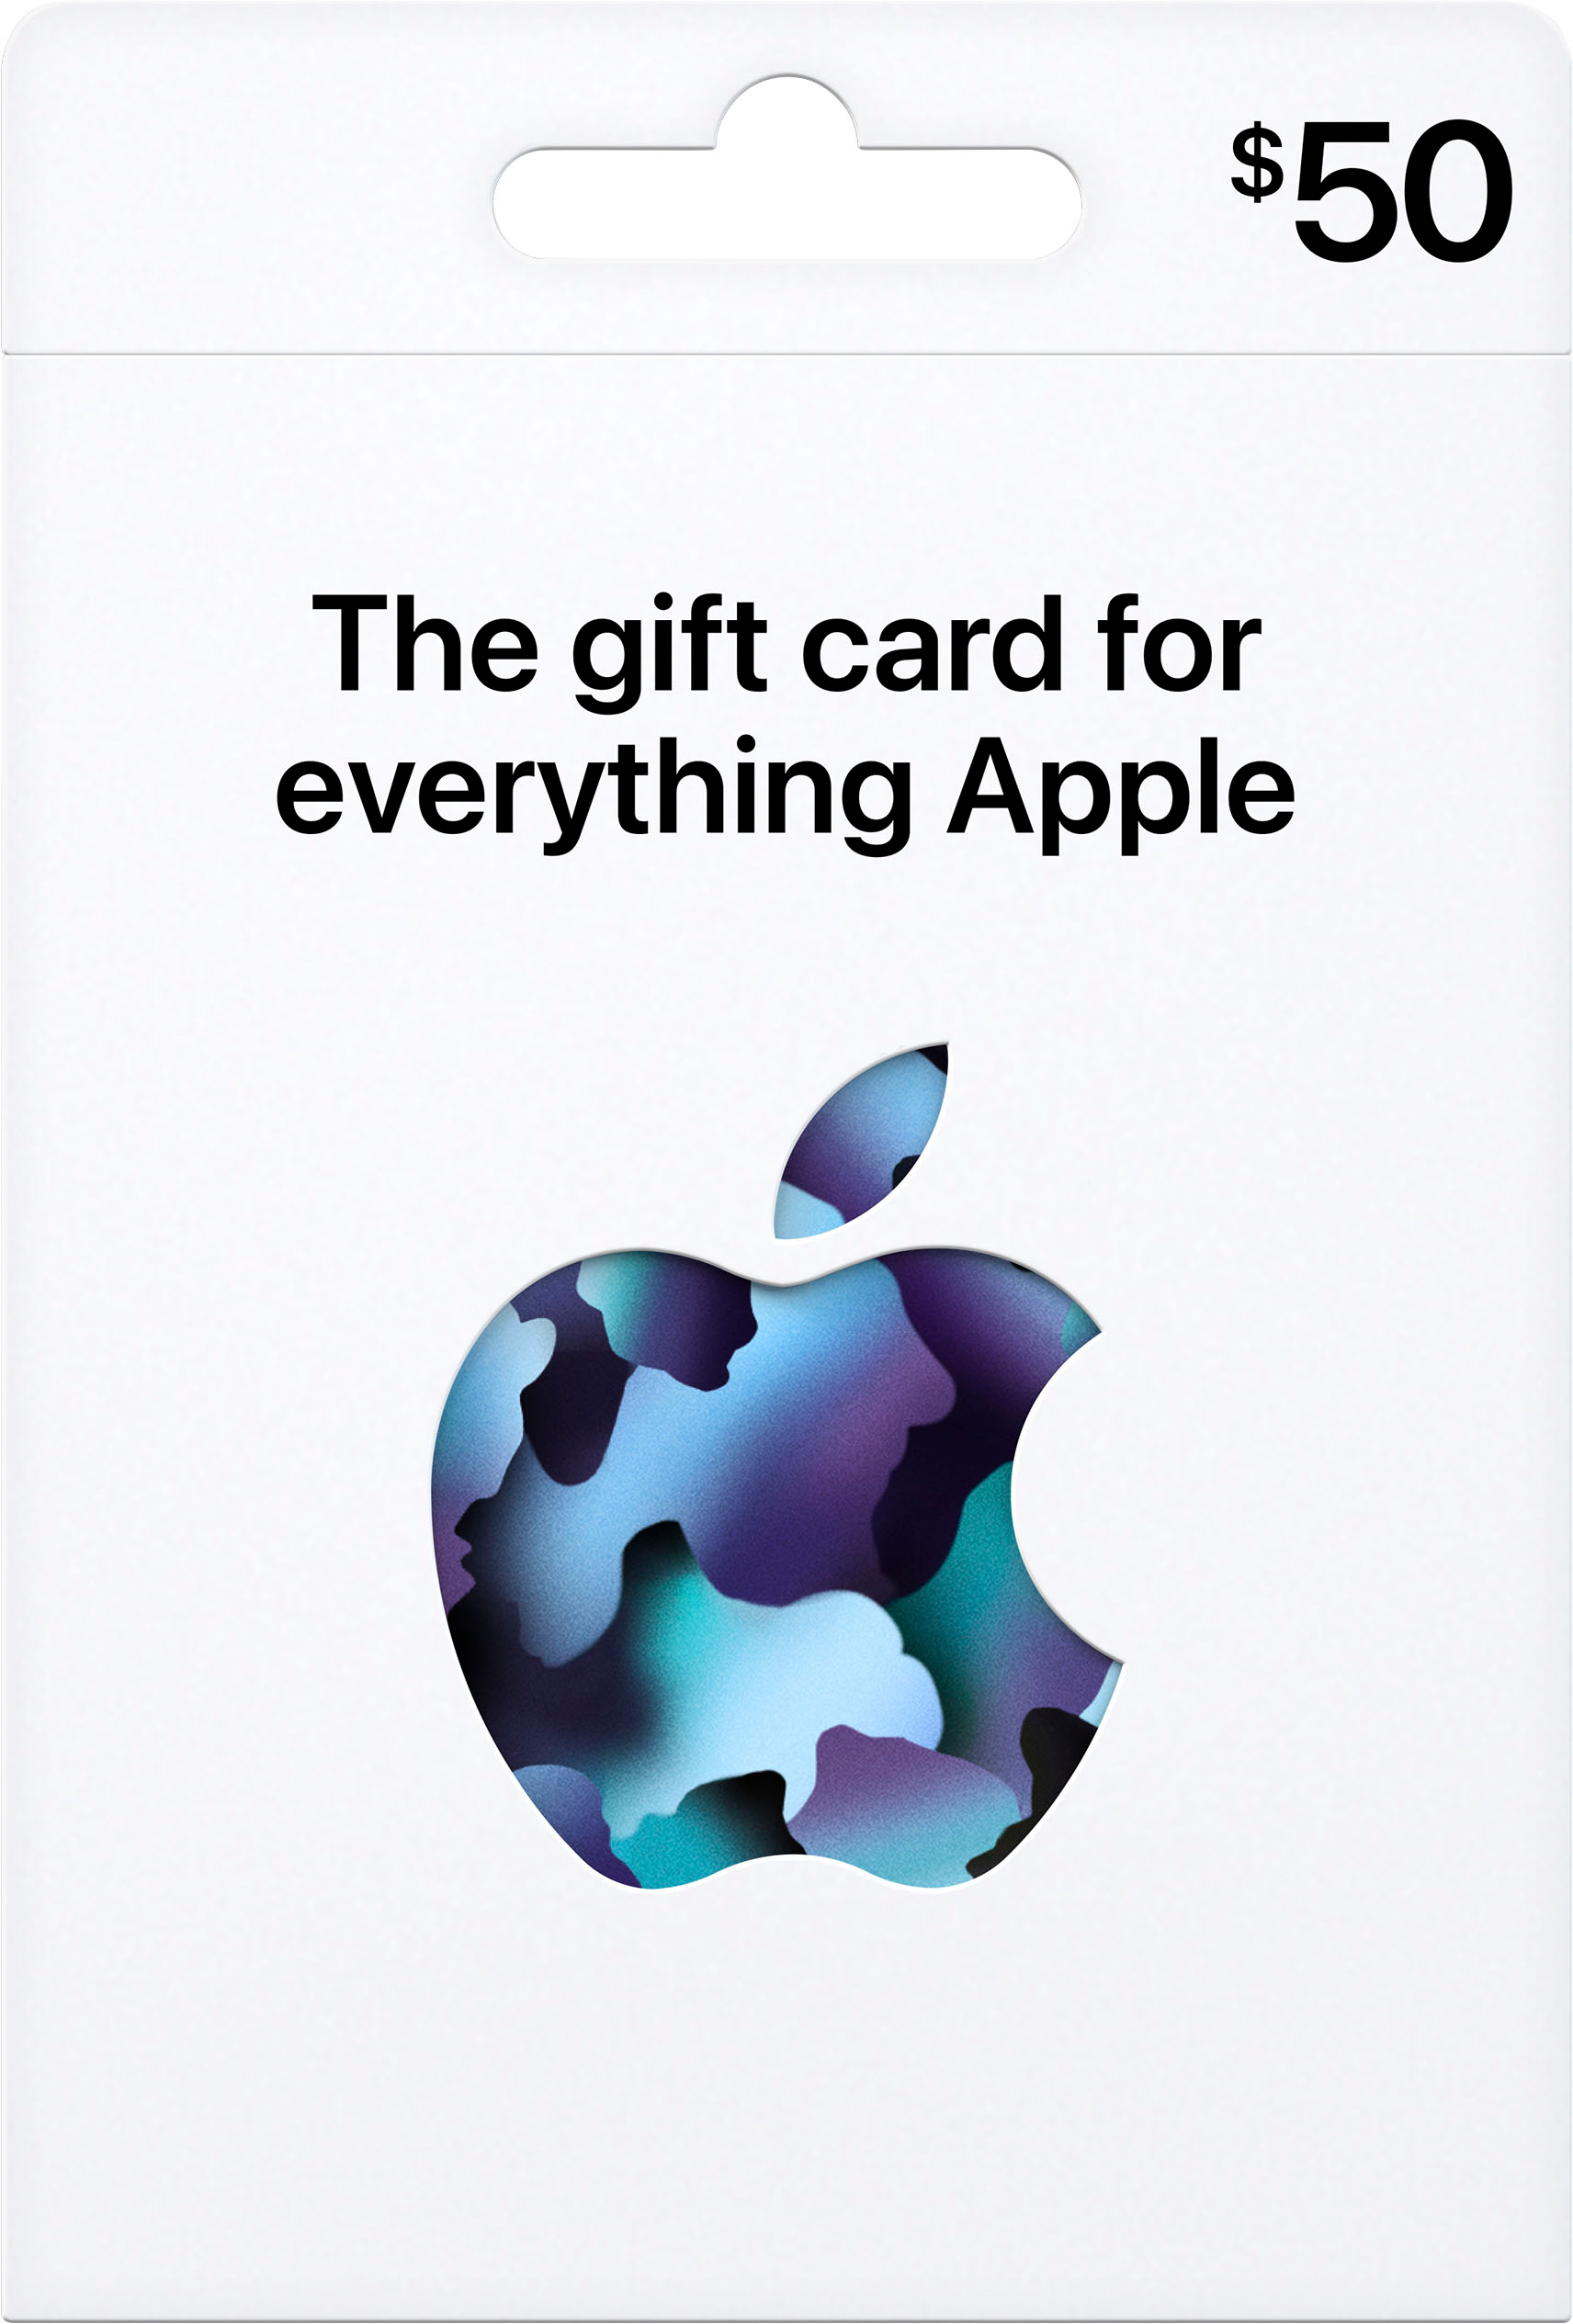 How to redeem gift cards and codes on iTunes and the App Store in